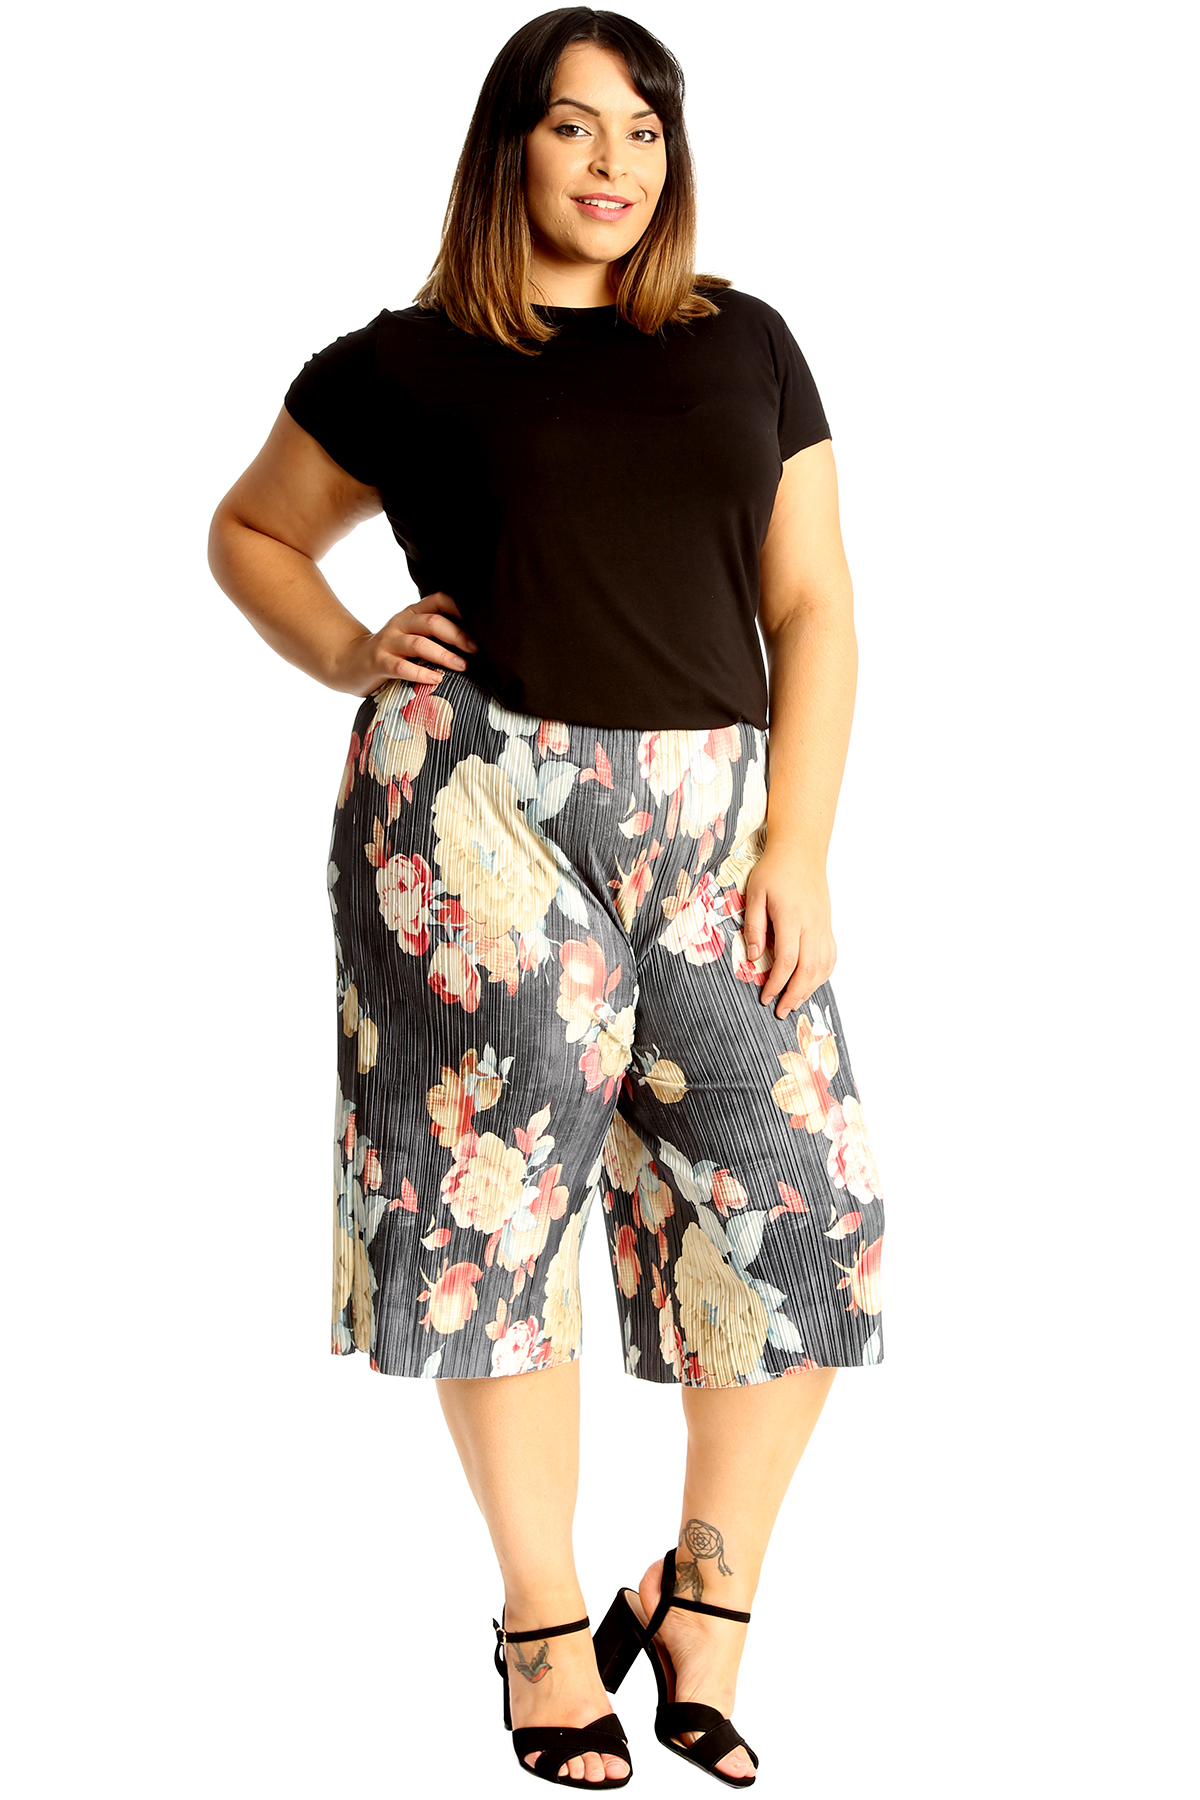 New Womens Plus Size Culottes Ladies Shorts Floral Print Palazzo Pants Crinkle Ebay